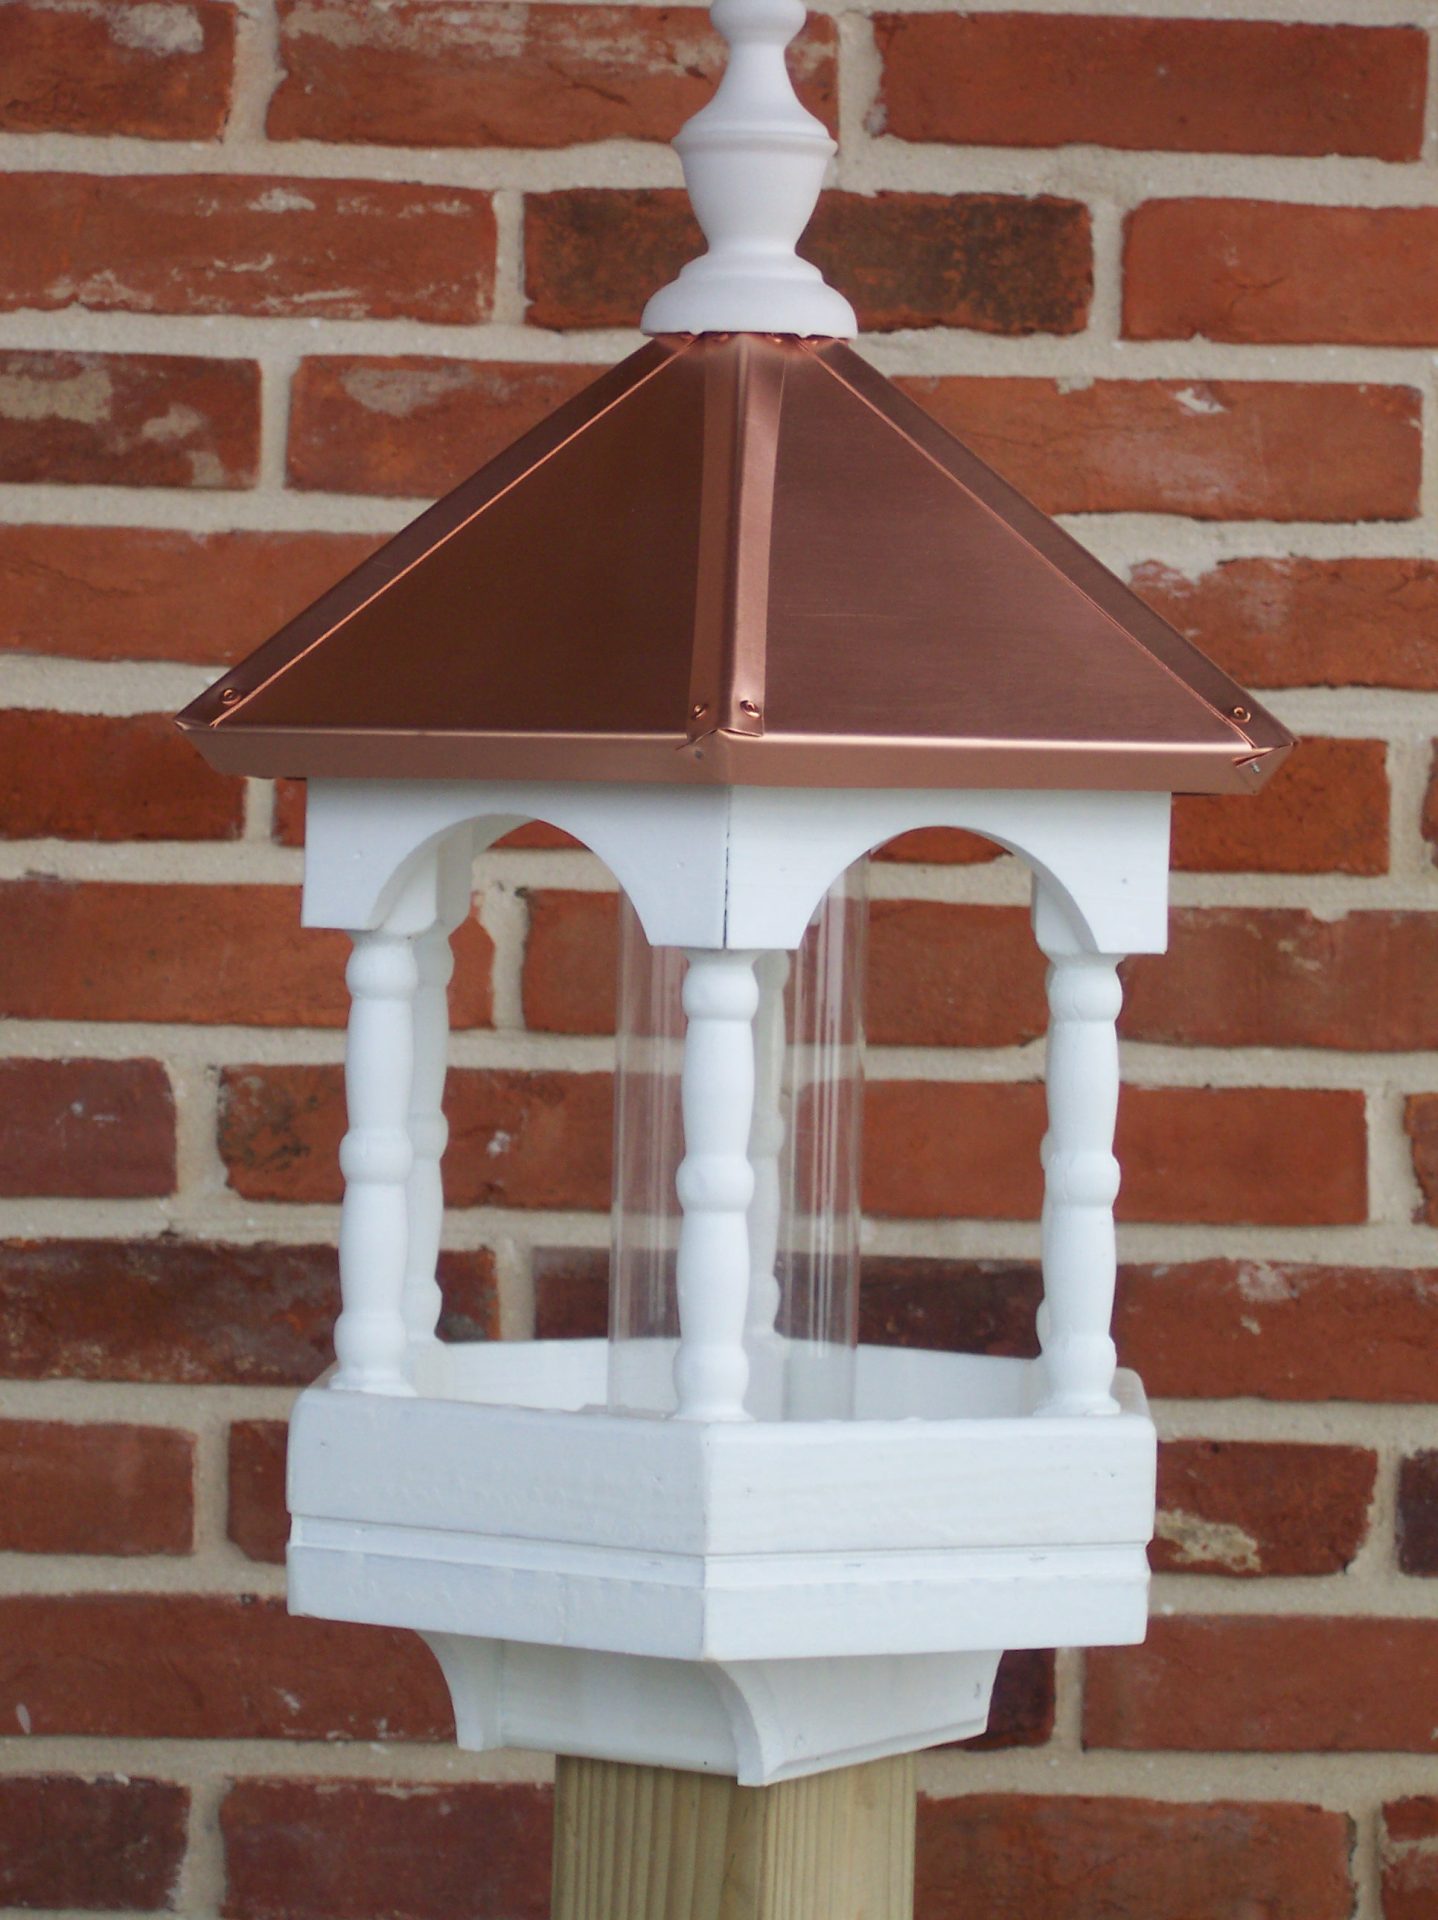 Small White Bird Feeder with Spindles and Copper Roof